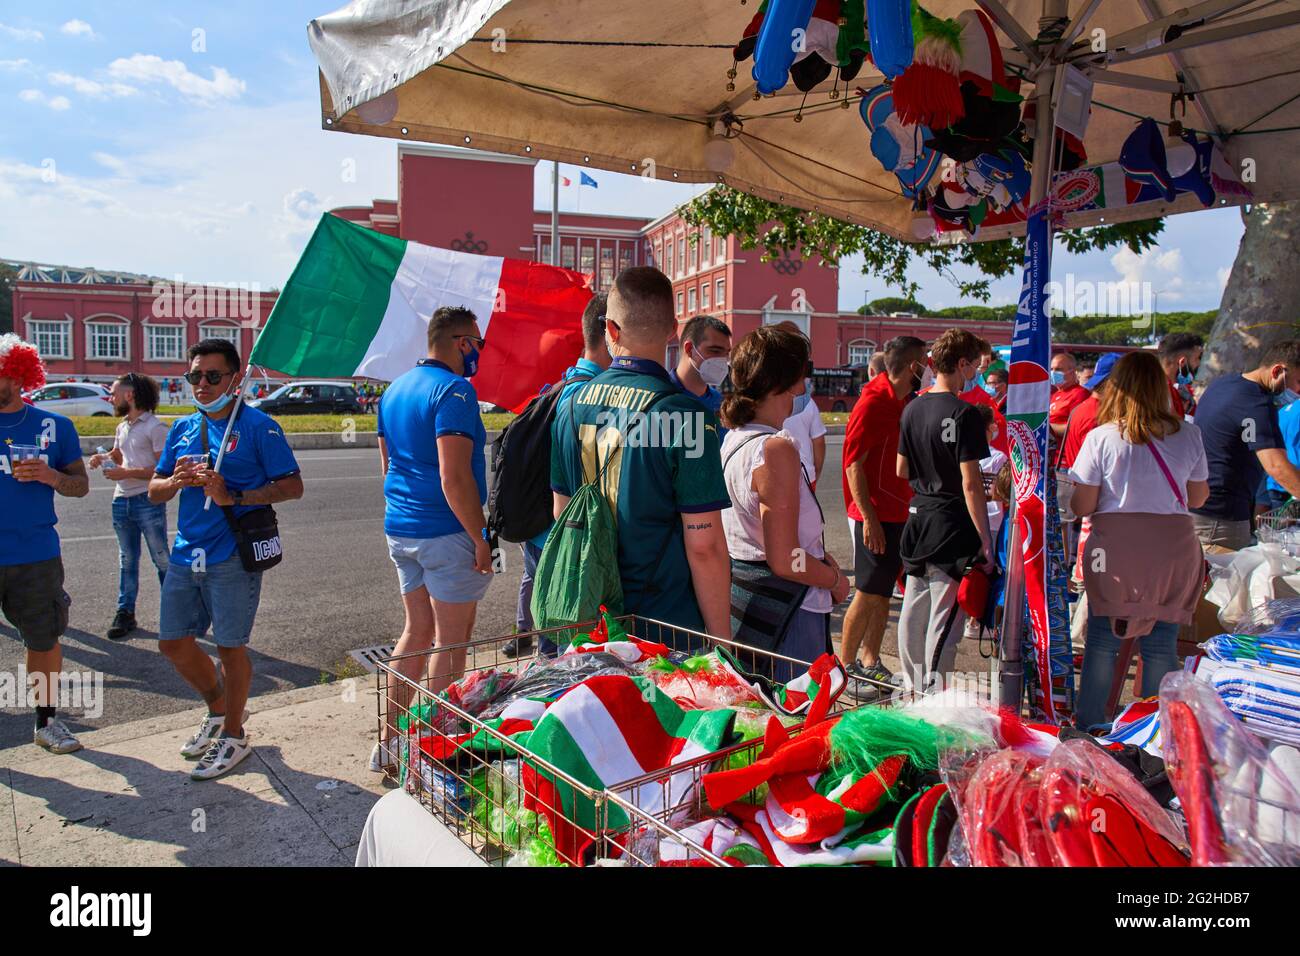 Rome, Italy. 11th June, 2021. Italian fans at the Olympic Stadion of Rome before the match TURKEY - ITALY Football European Championships 2020, 2021 Season 2020/2021 ROME, ITALY, JUNE 11, 2021. Credit: Peter Schatz/Alamy Live News Stock Photo